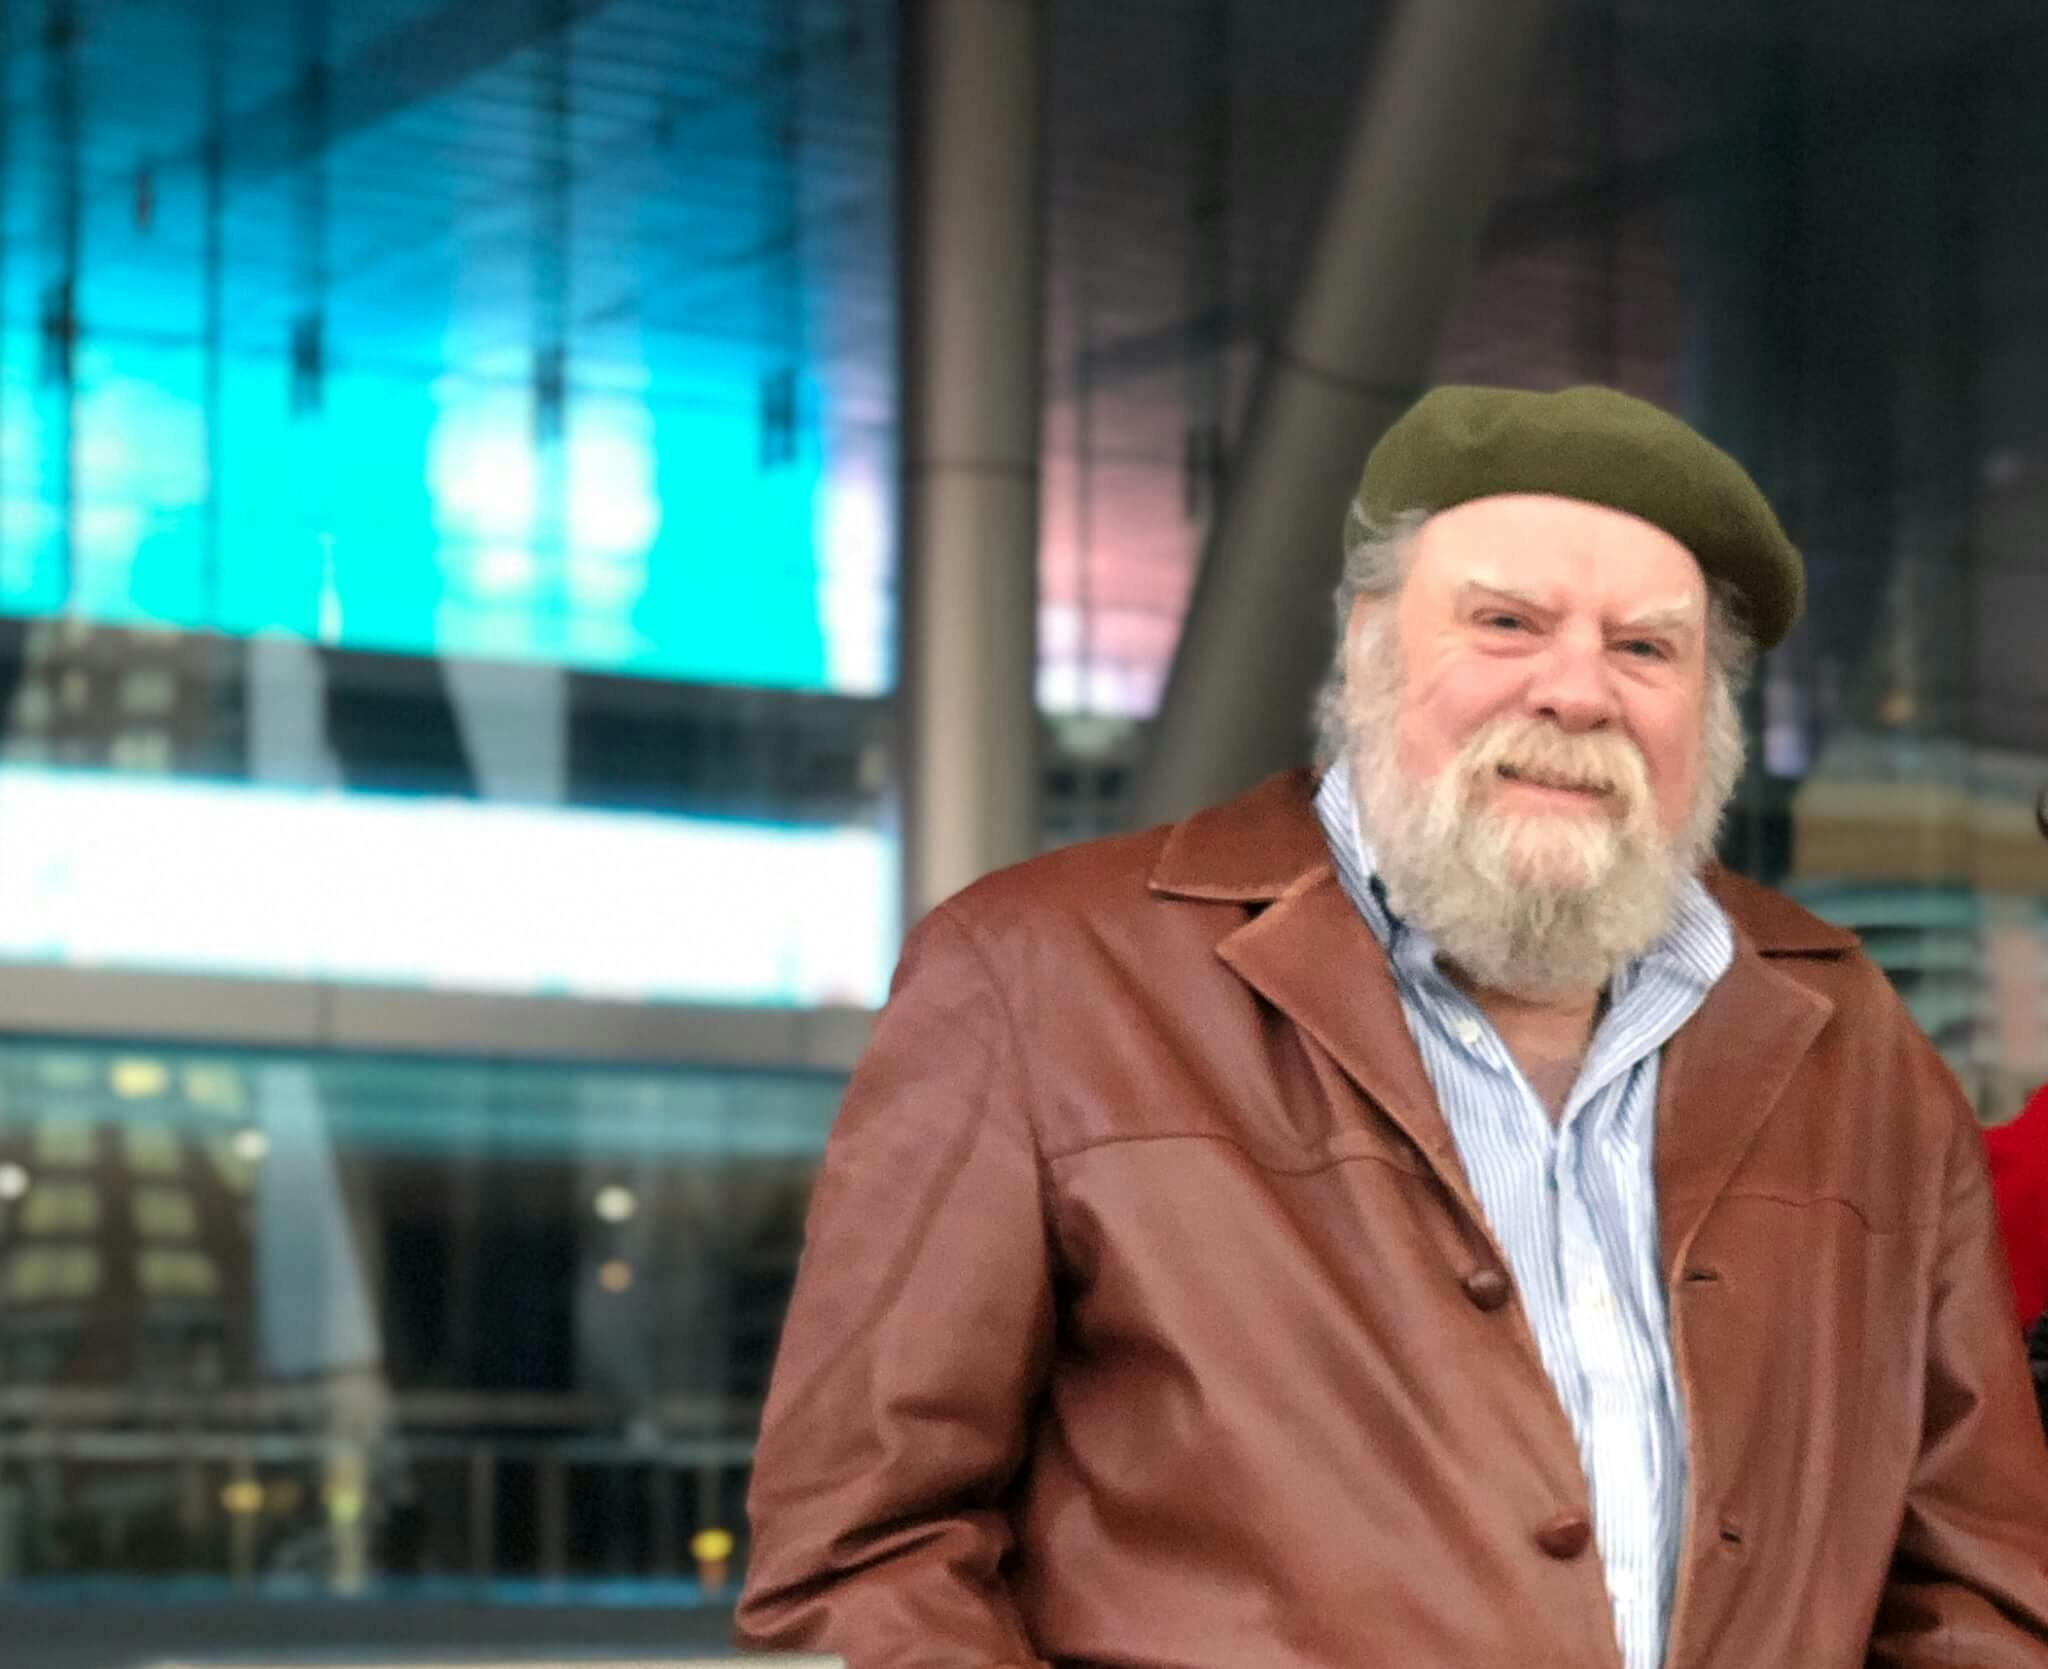 George Fifield stands in a brown jacket and green hat in front of the Boston Convention & Exhibition Center, lit by blue neon light.